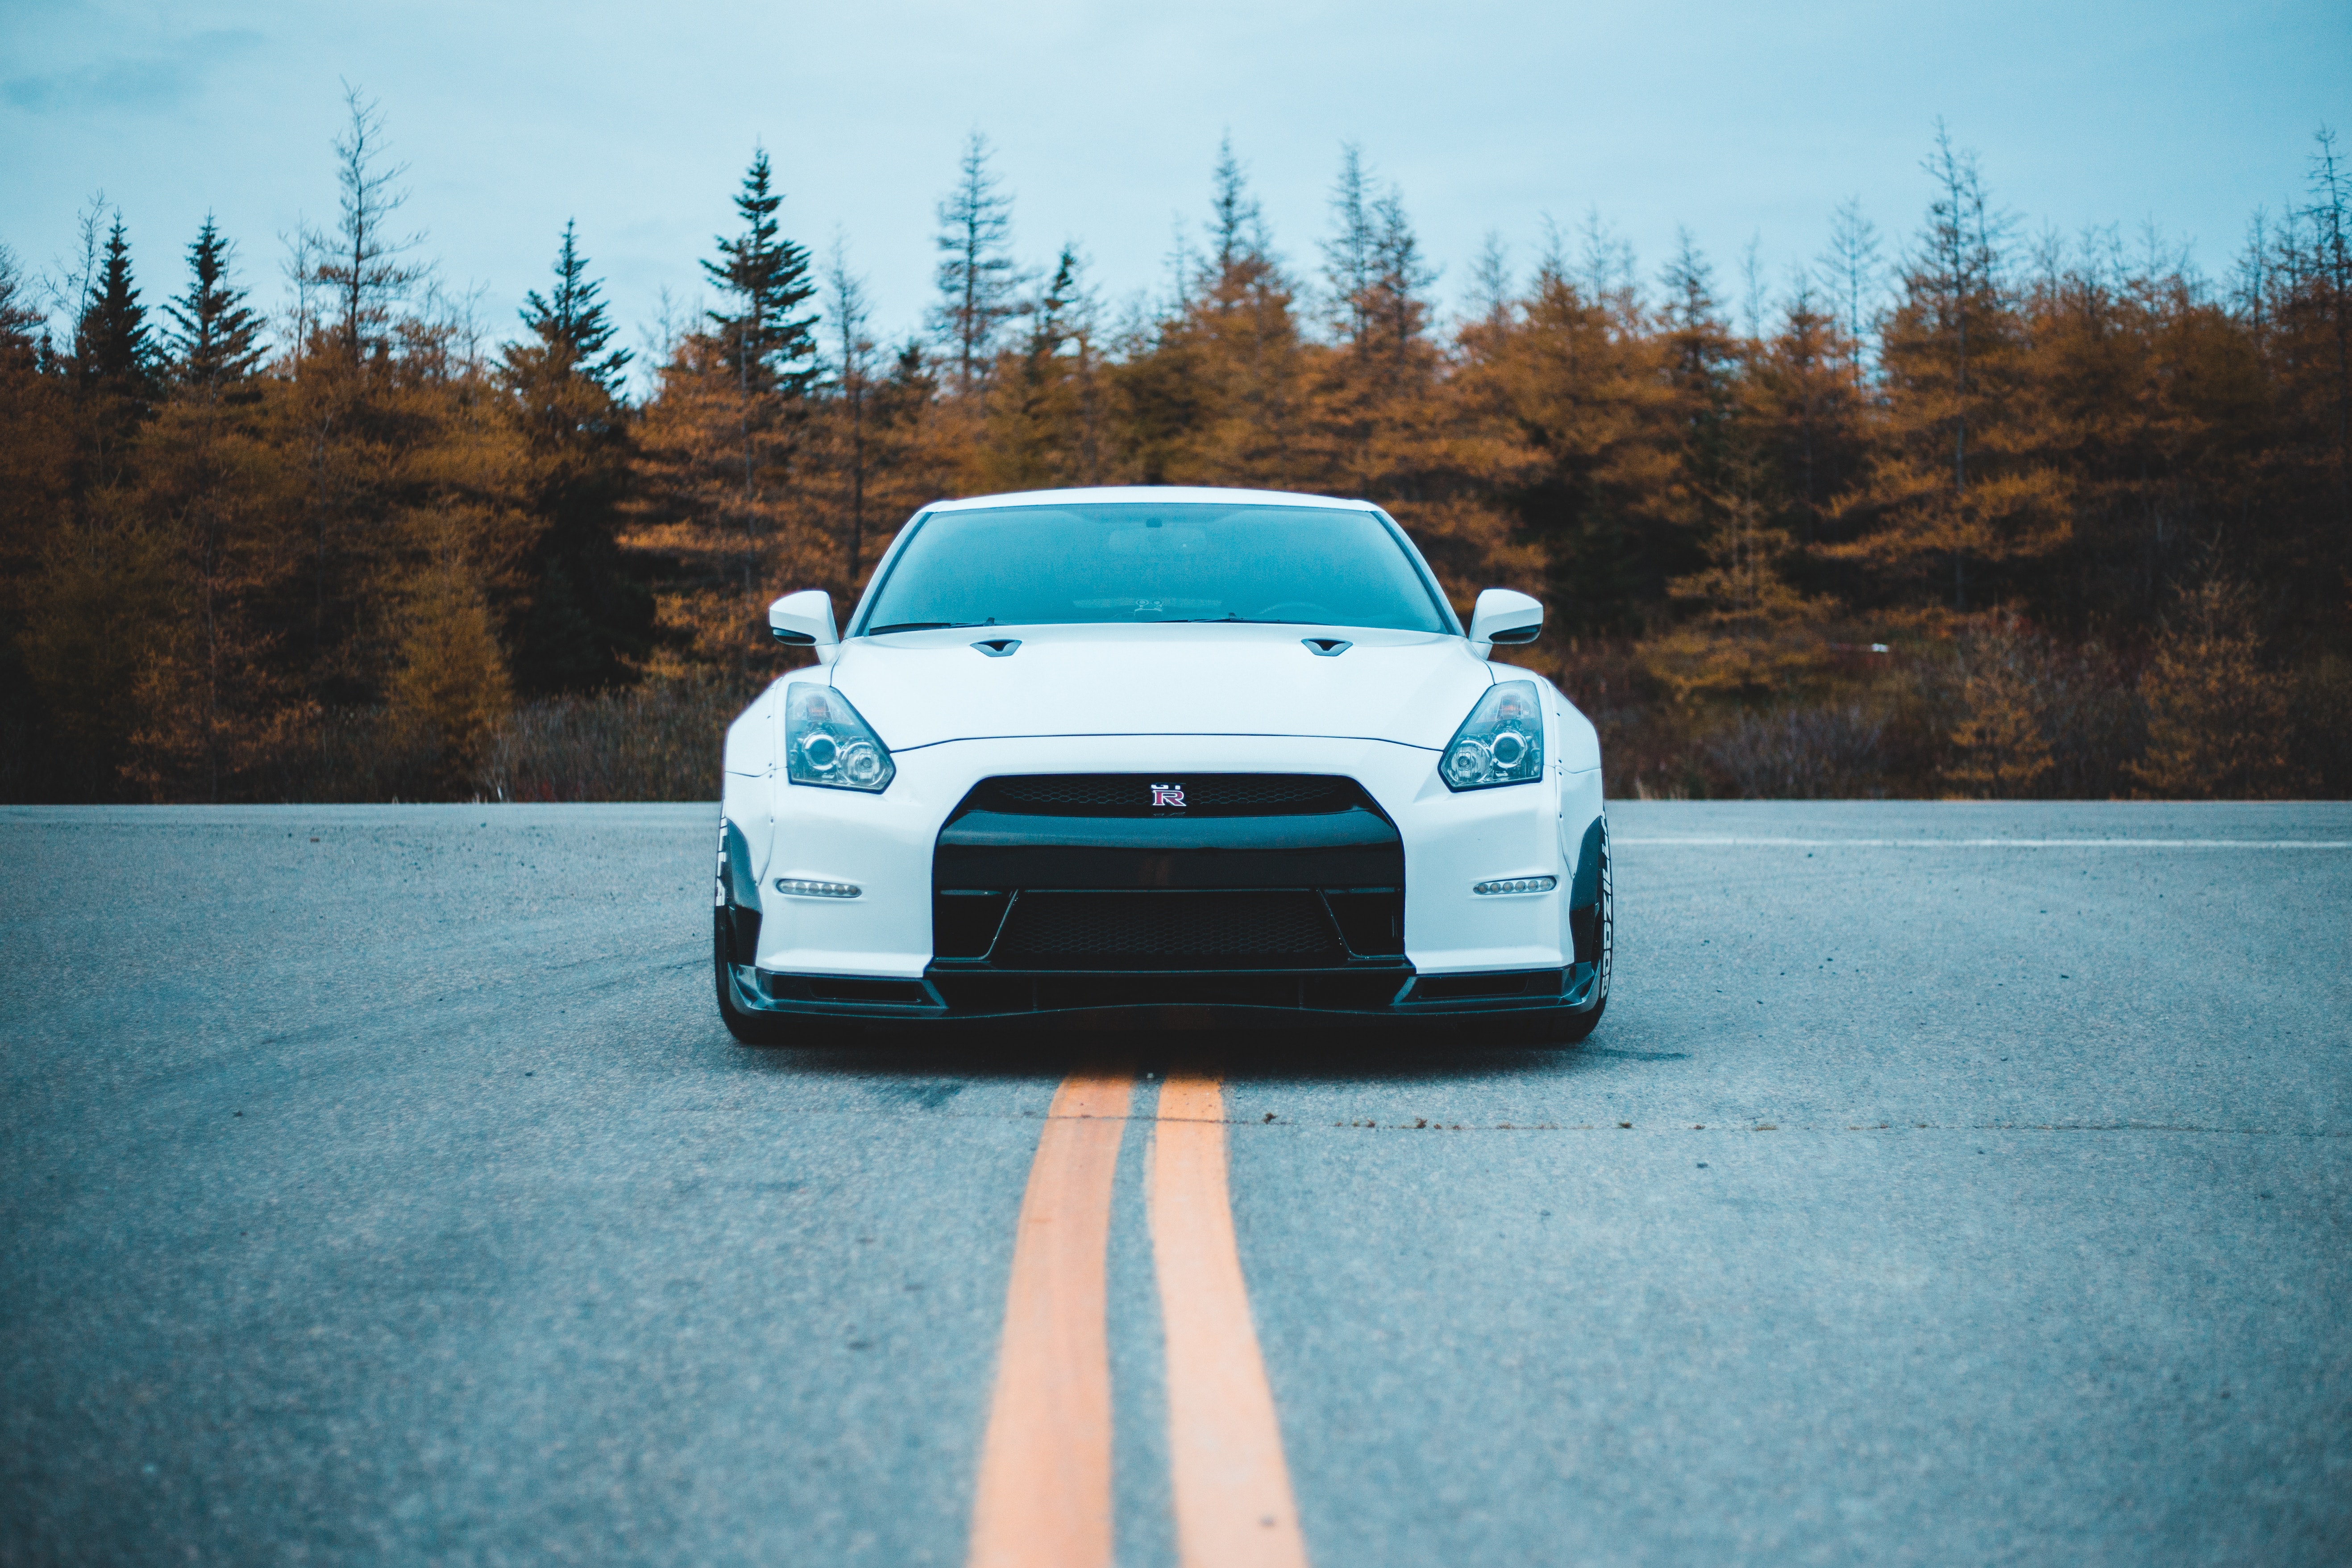 nissan gt r, sports, nissan, cars, front view, sports car